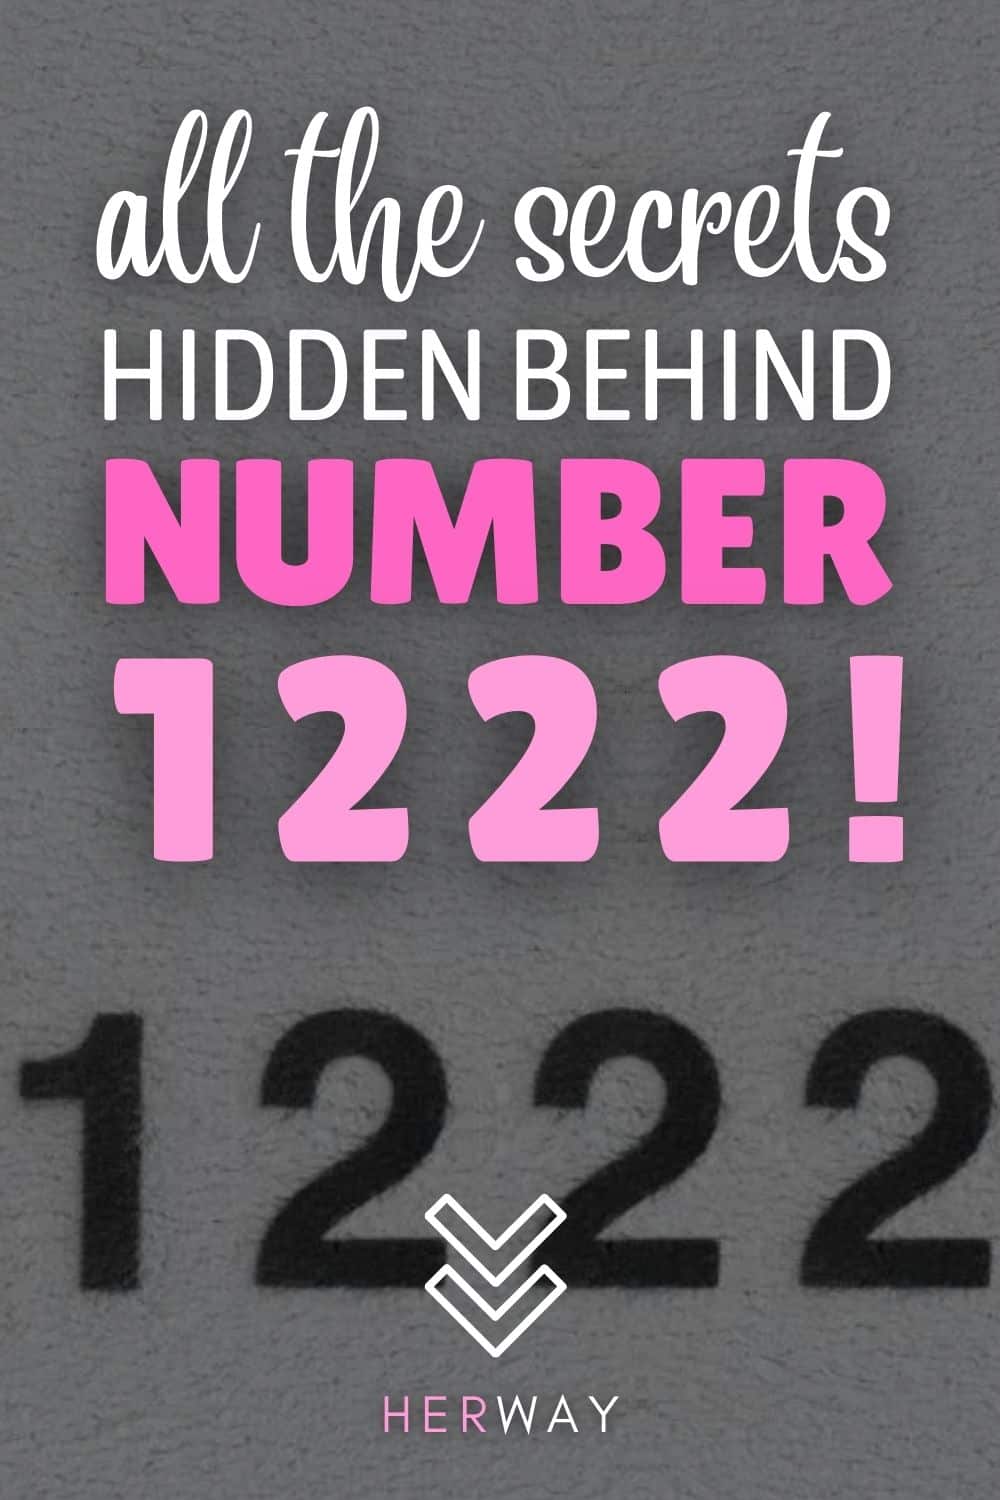 1222 Meaning Of Angel Number And 6 Reasons Why You Keep Seeing It Pinterest